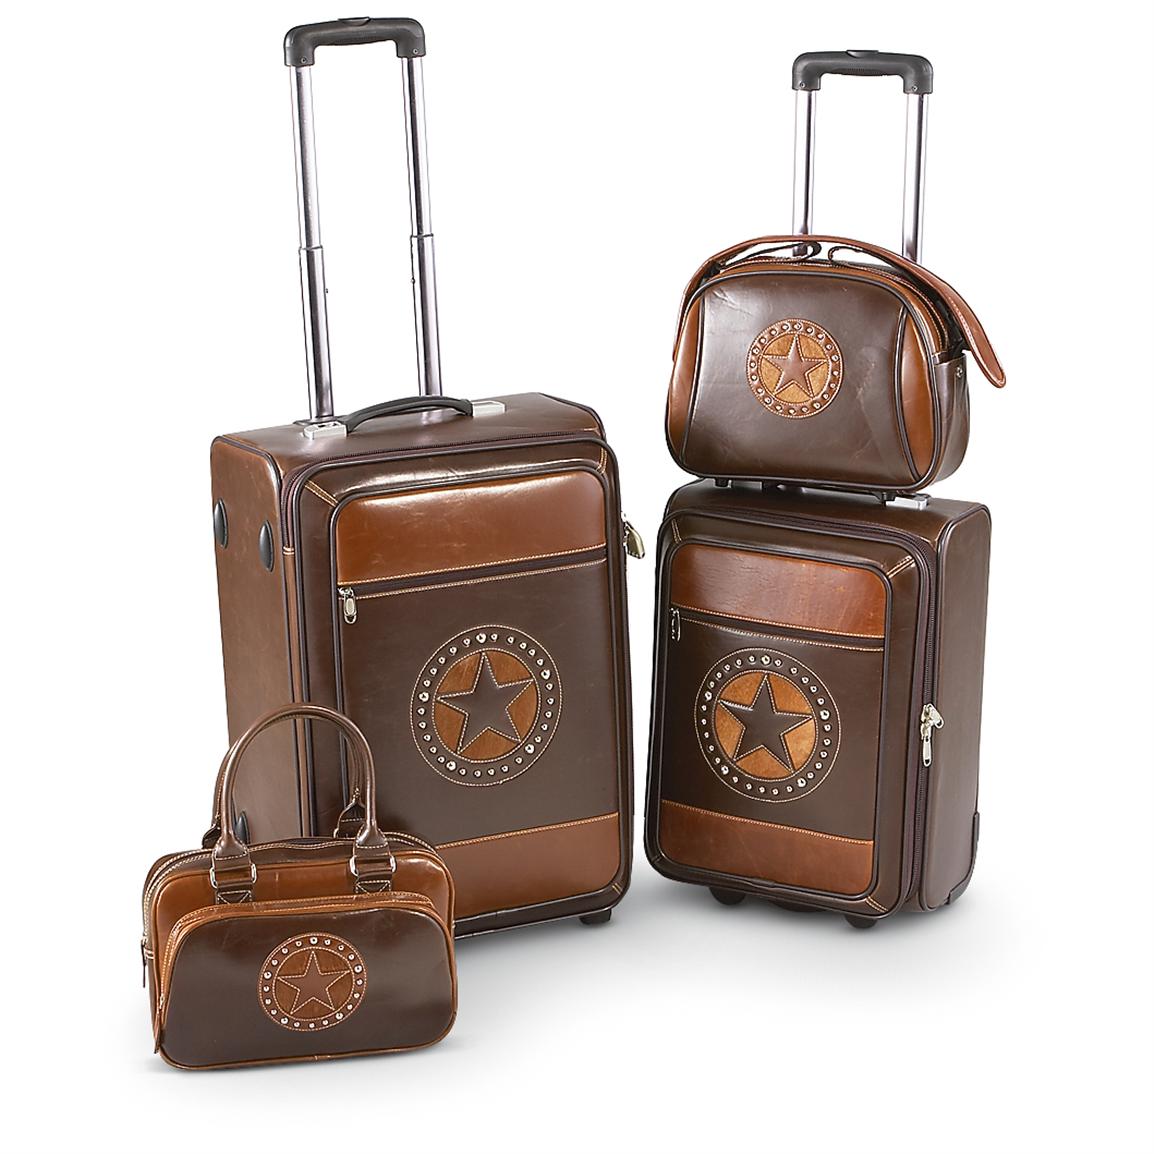 4 - Pc. Western Star Luggage Set - 194088, Luggage at Sportsman's Guide